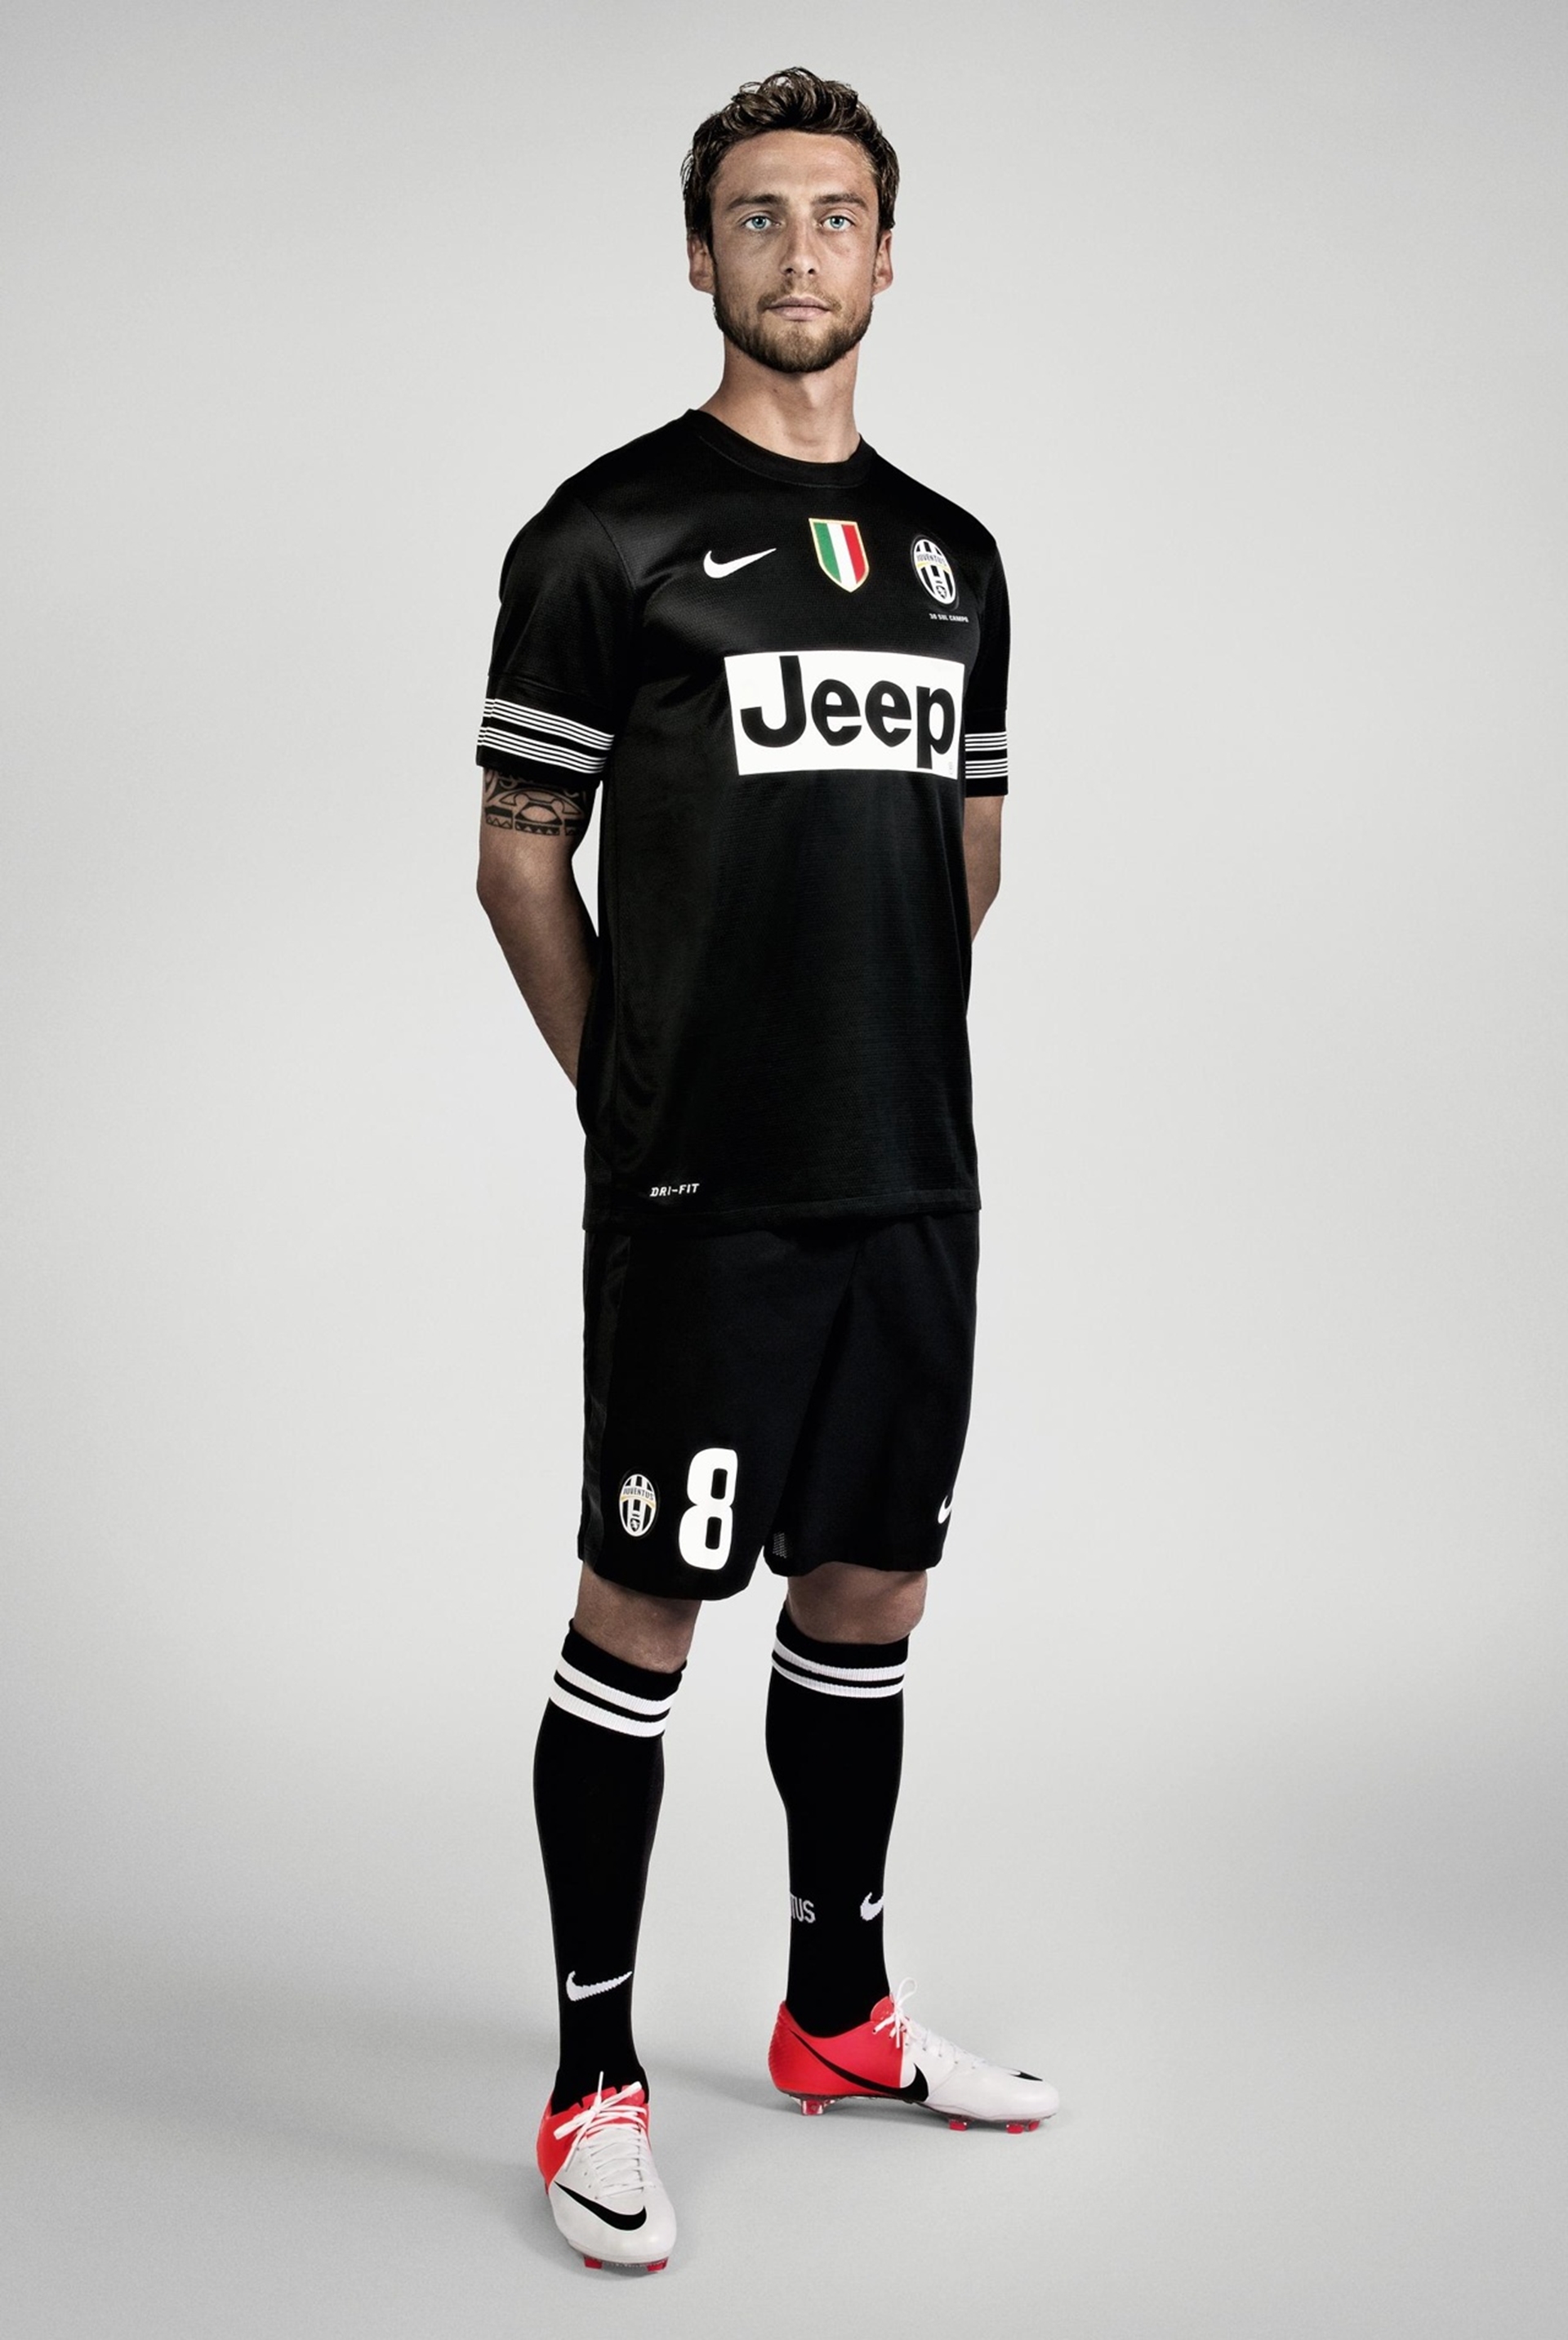 THE JEEP BRAND DEBUTS ON NEW JUVENTUS FOOTBALL CLUB JERSEY